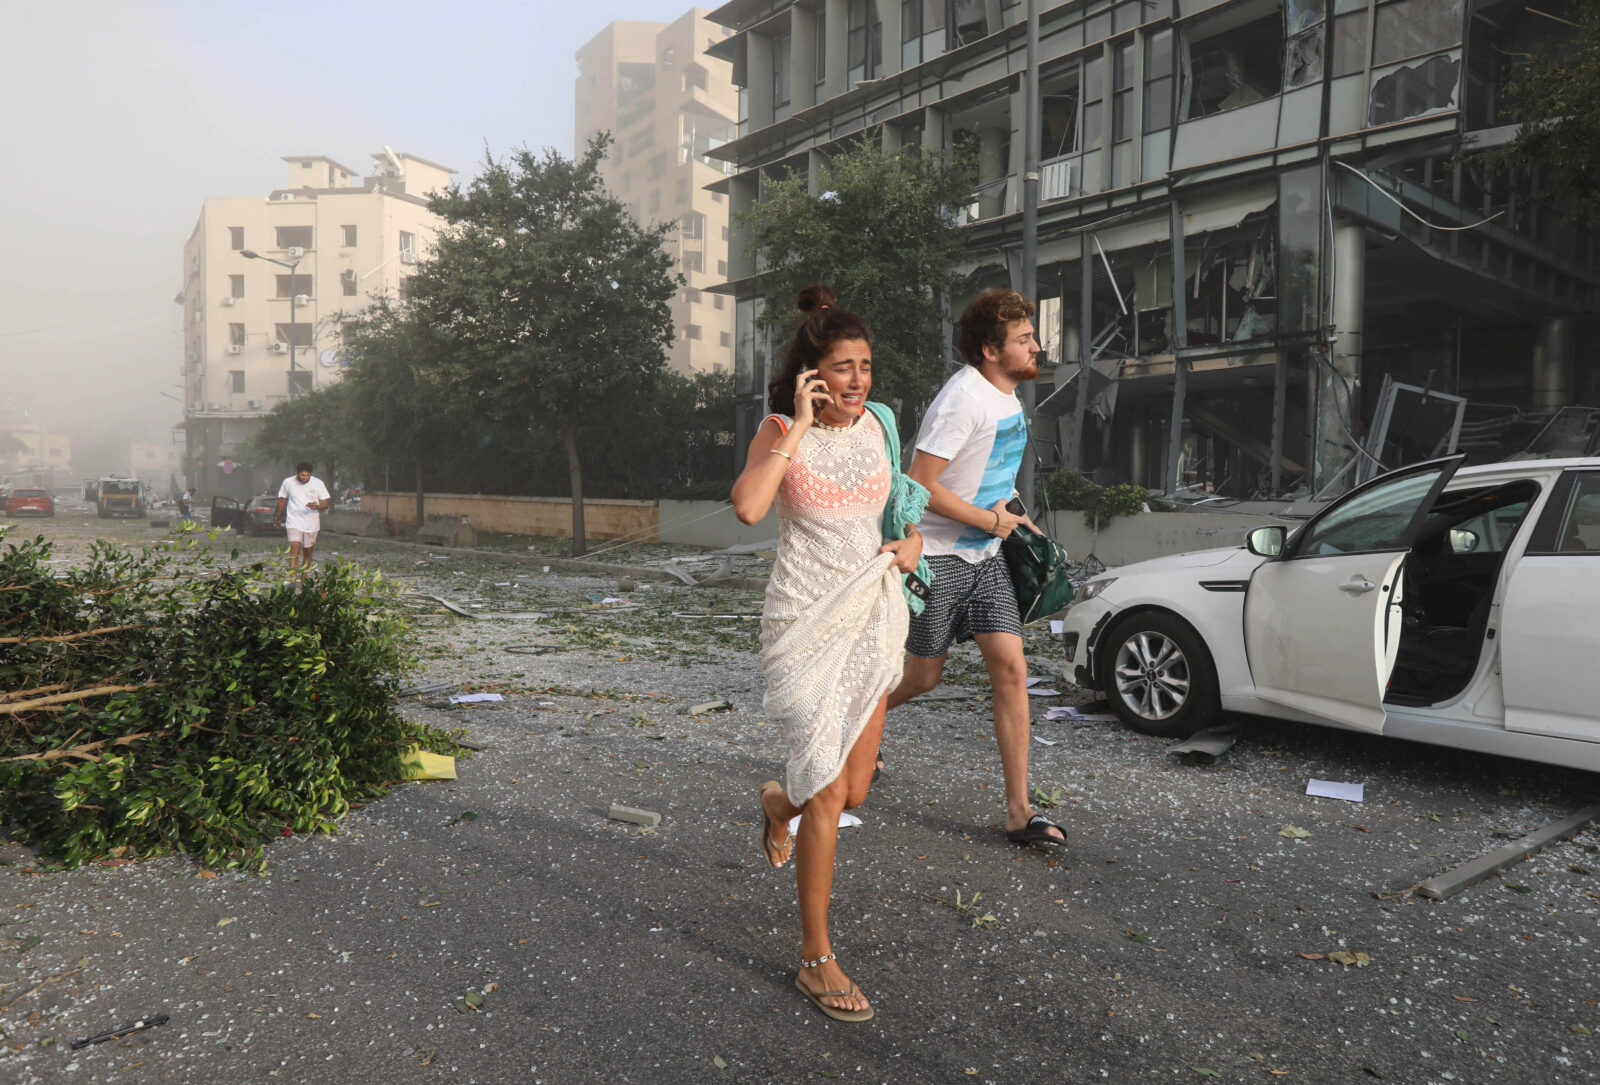 People run for cover following an explosion in Beirut's port area